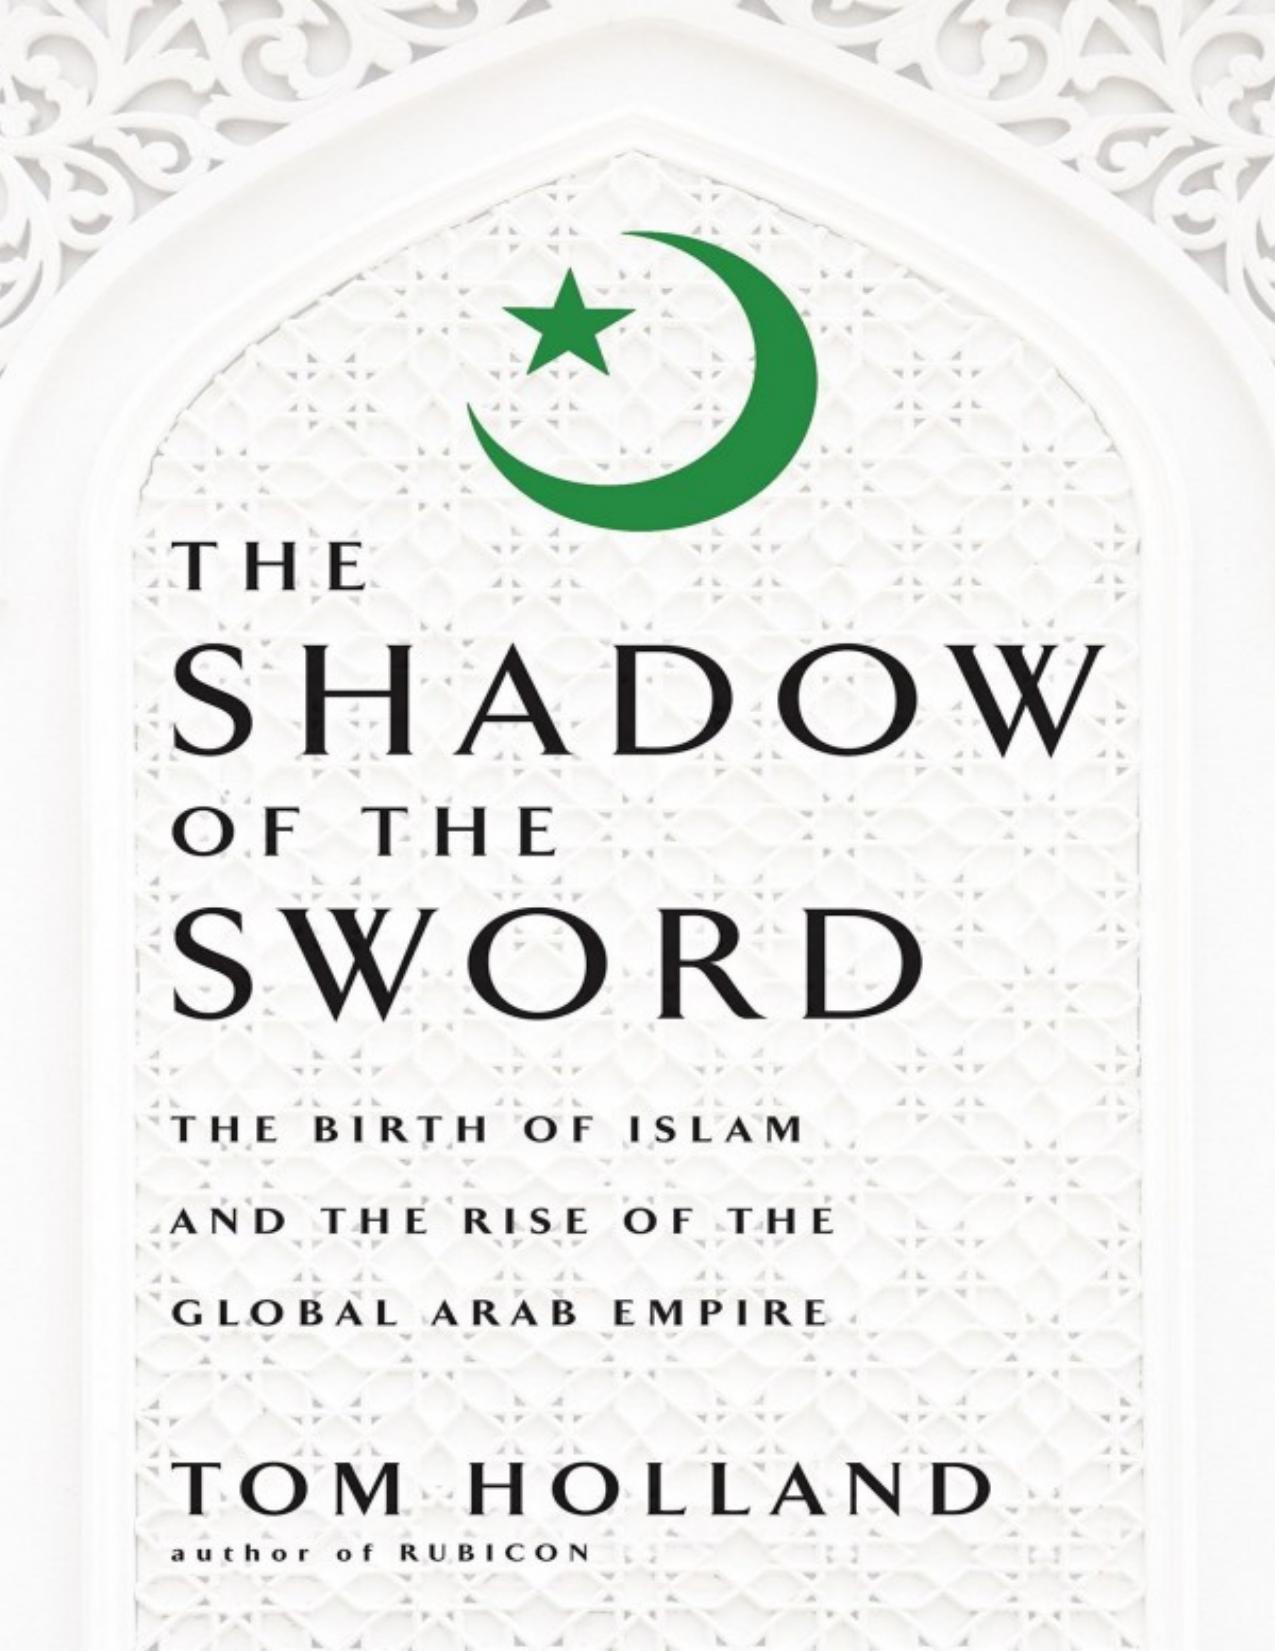 In the Shadow of the Sword: The Birth of Islam and the Rise of the Global Arab Empire by Tom Holland